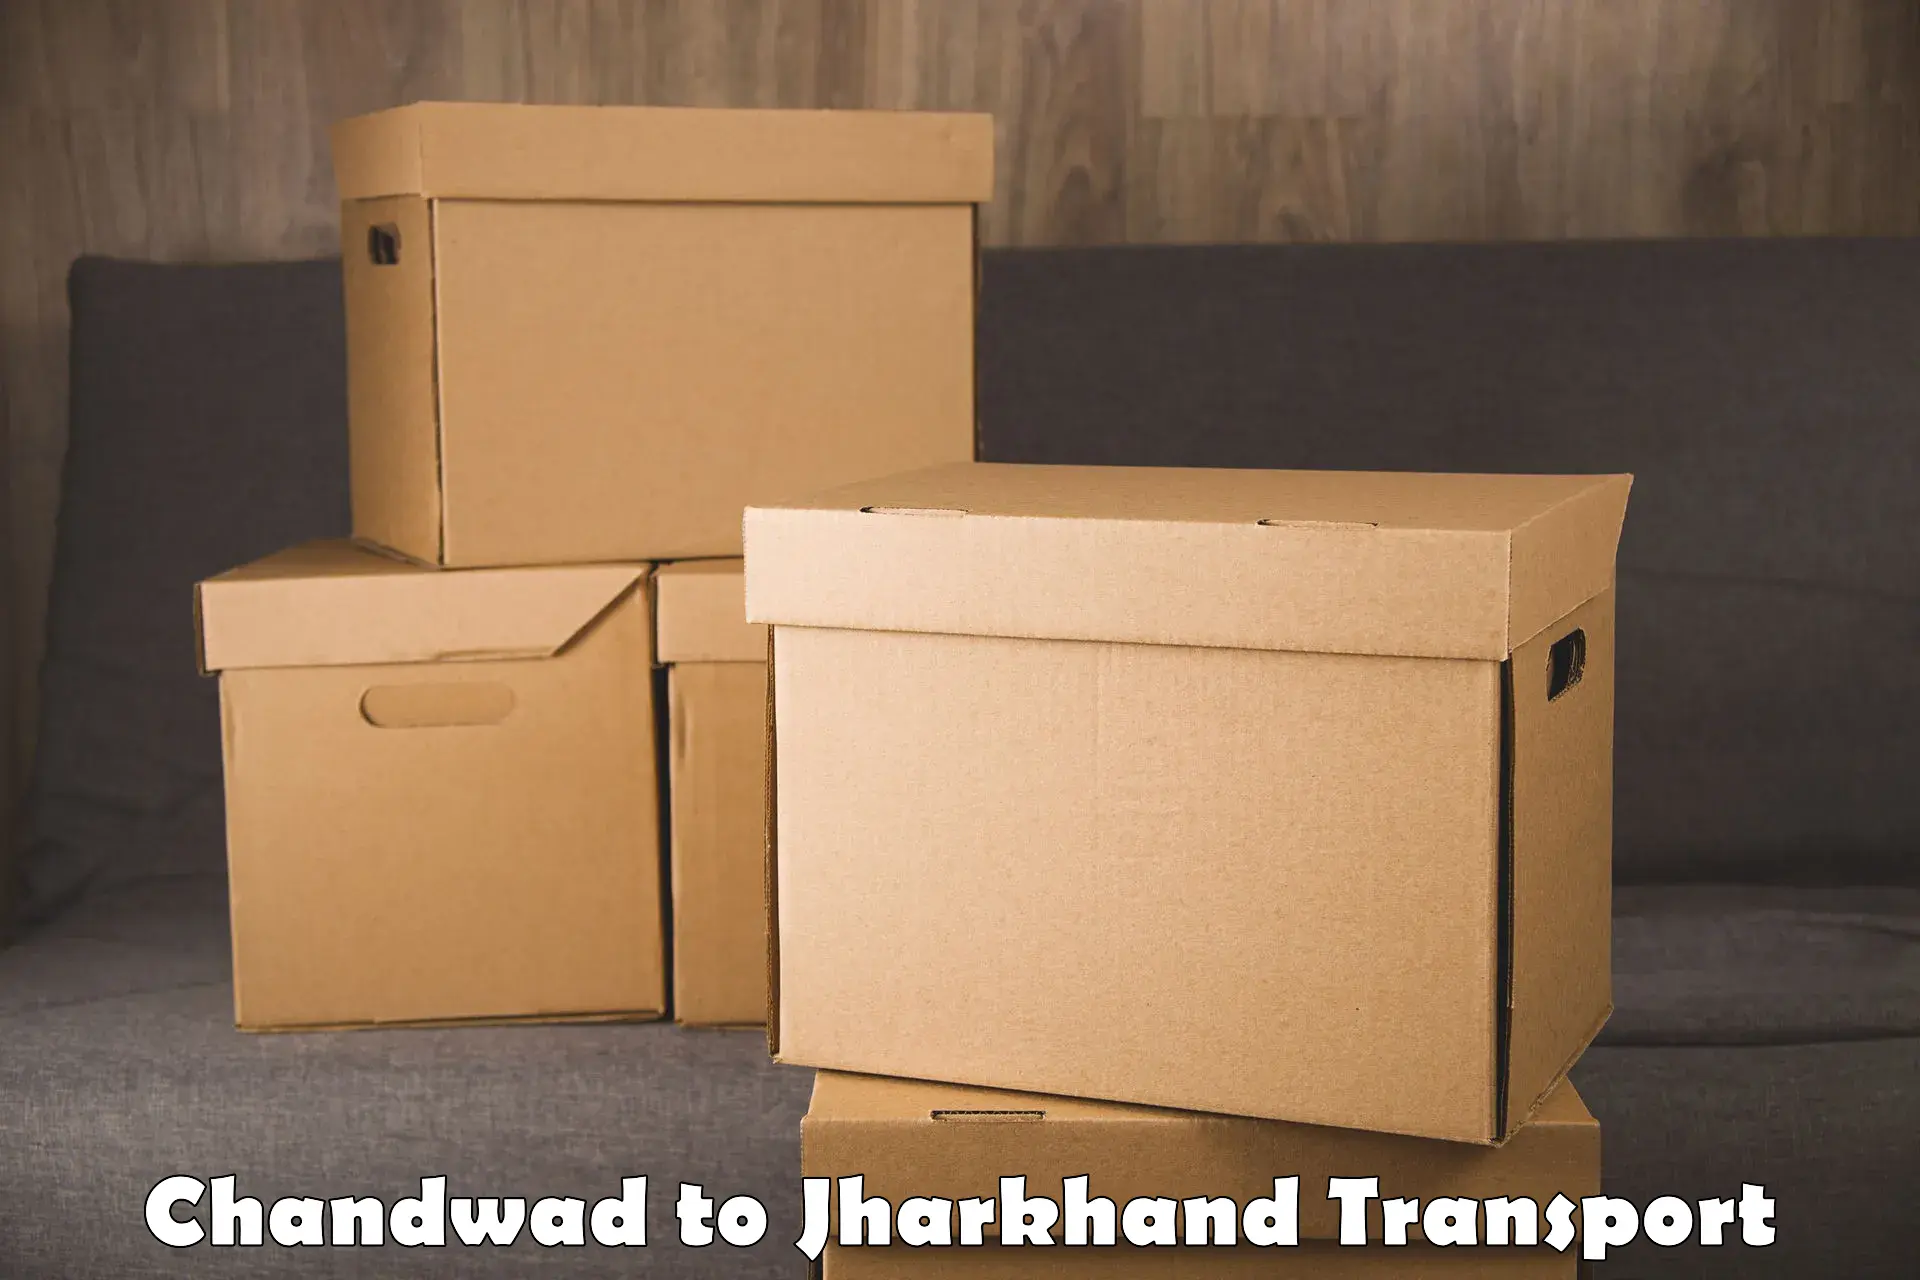 Goods delivery service Chandwad to Jamshedpur